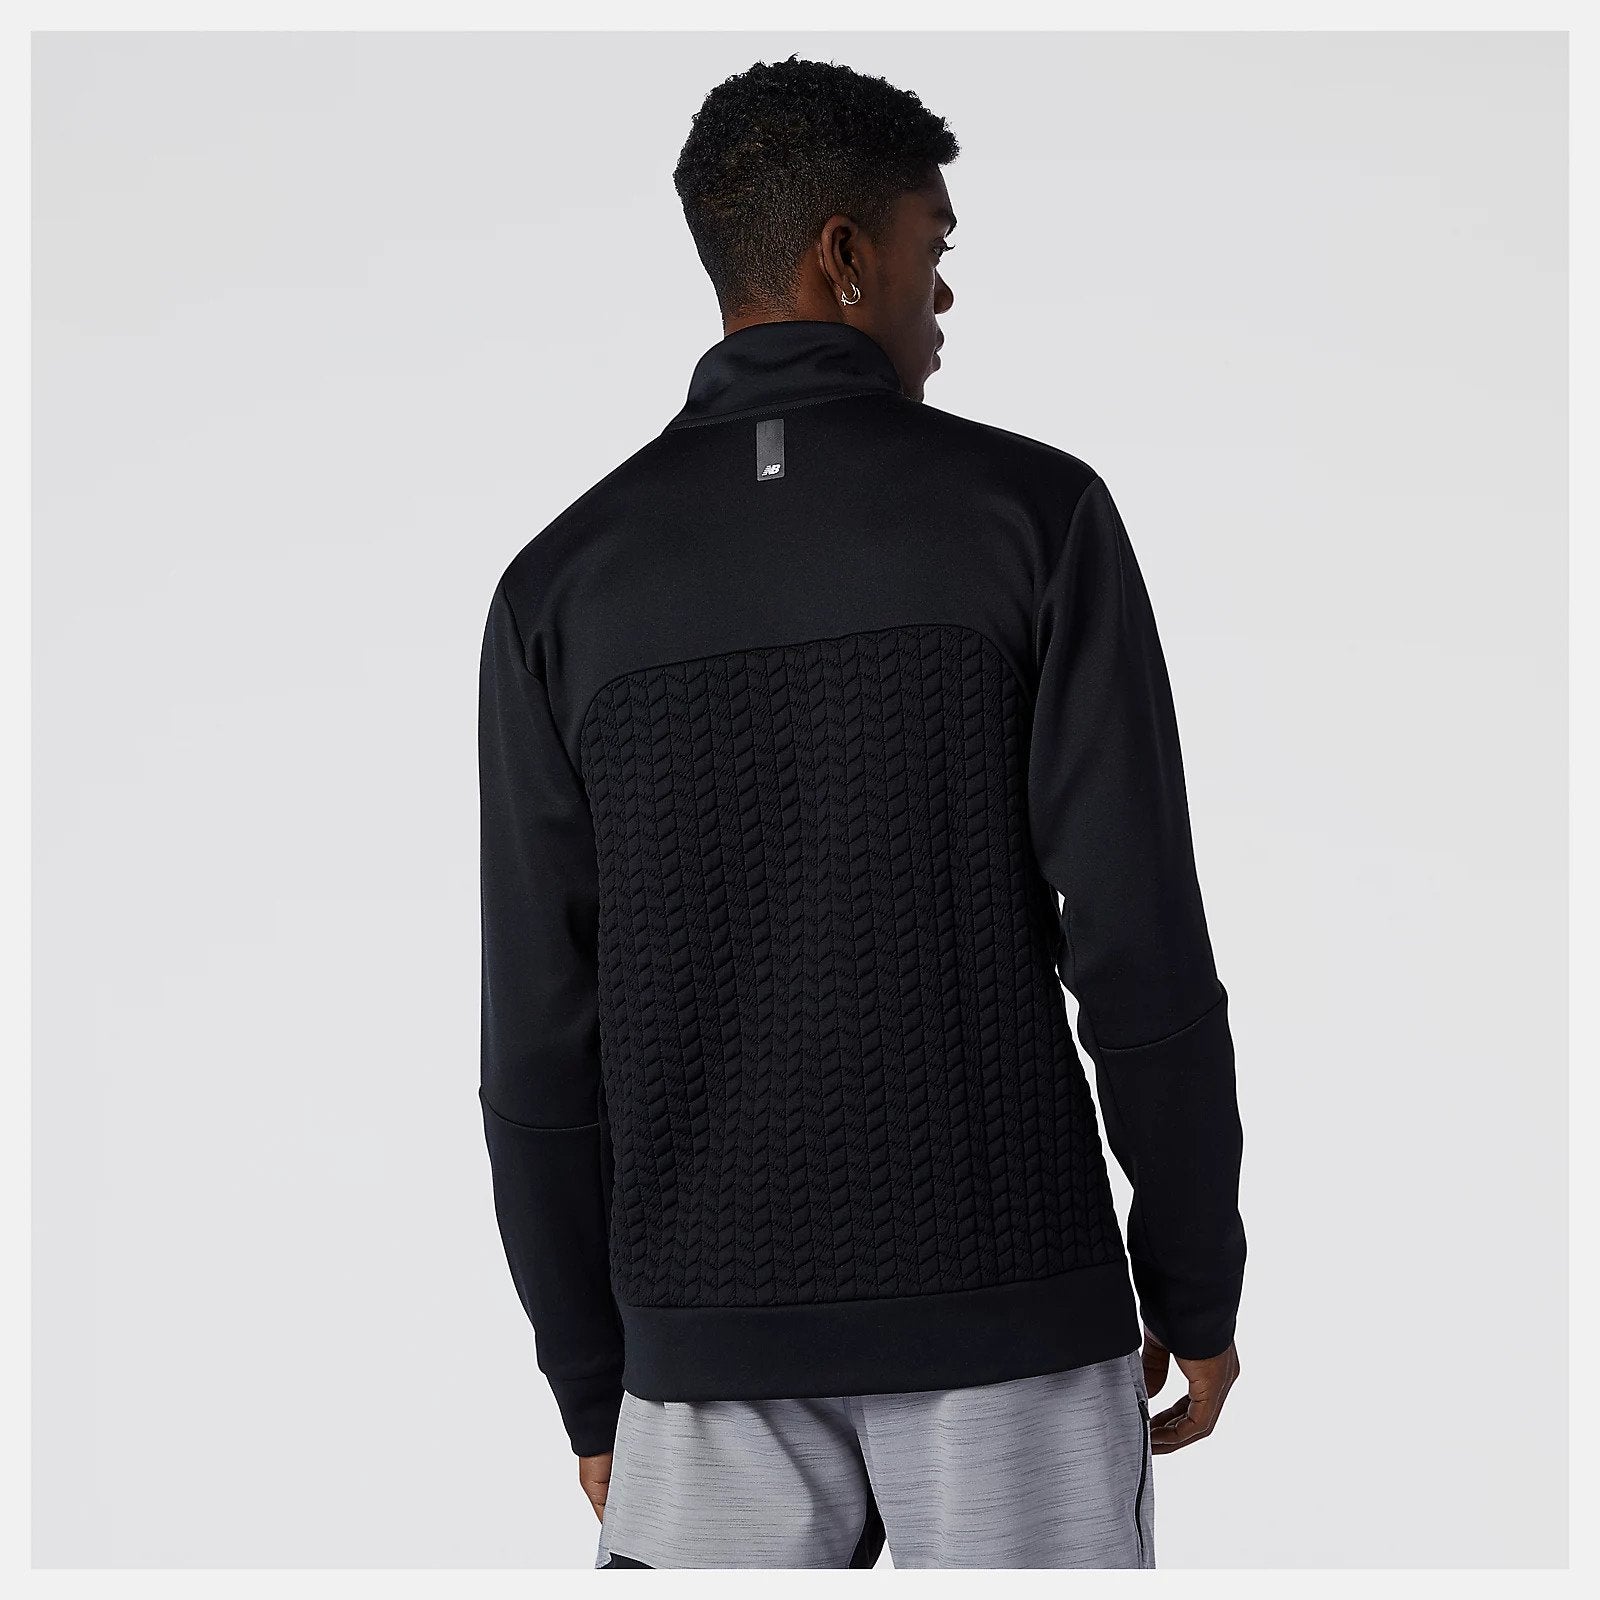 Back view of a model wearing the Men's Heat Loft Full Zip by New Balance in the color Alloy